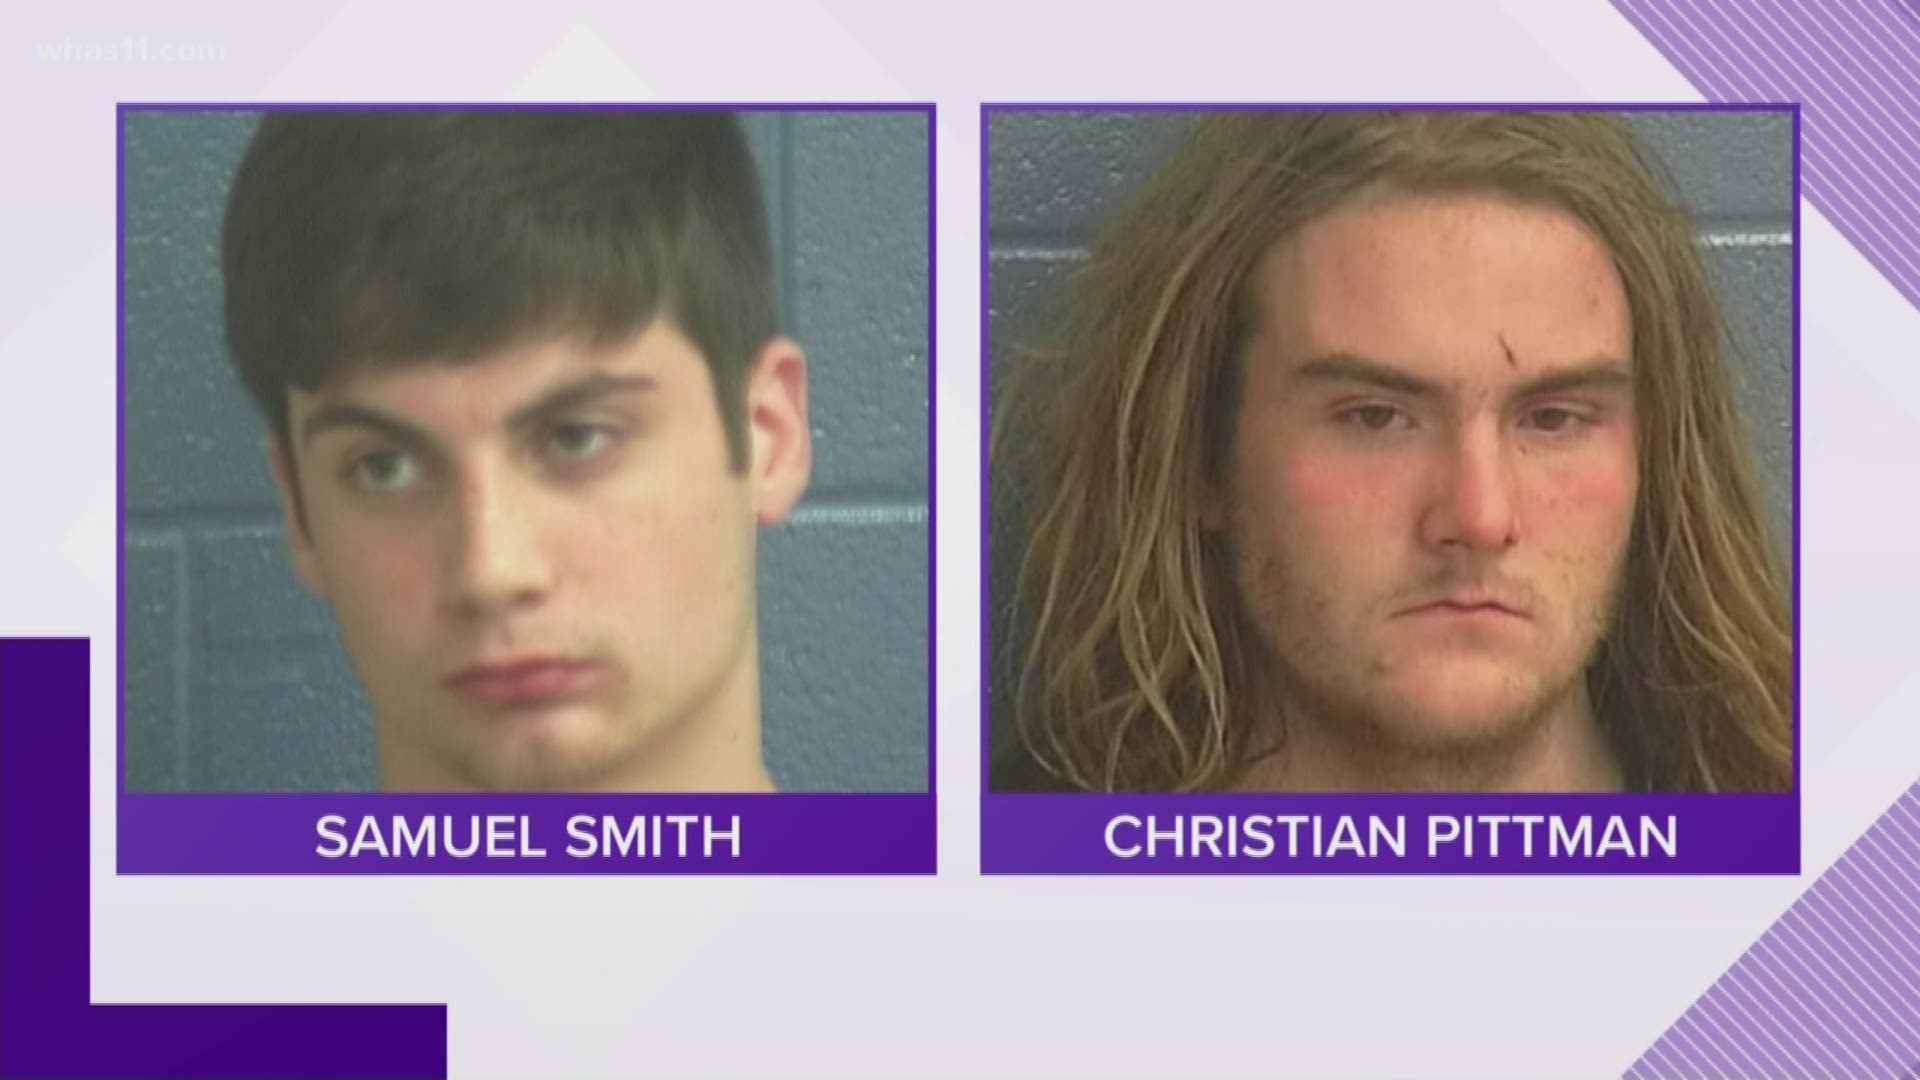 According to an arrest warrant, Samuel Smith, Christian Pittman and an unnamed 16-year-old were all involved in the robbery.